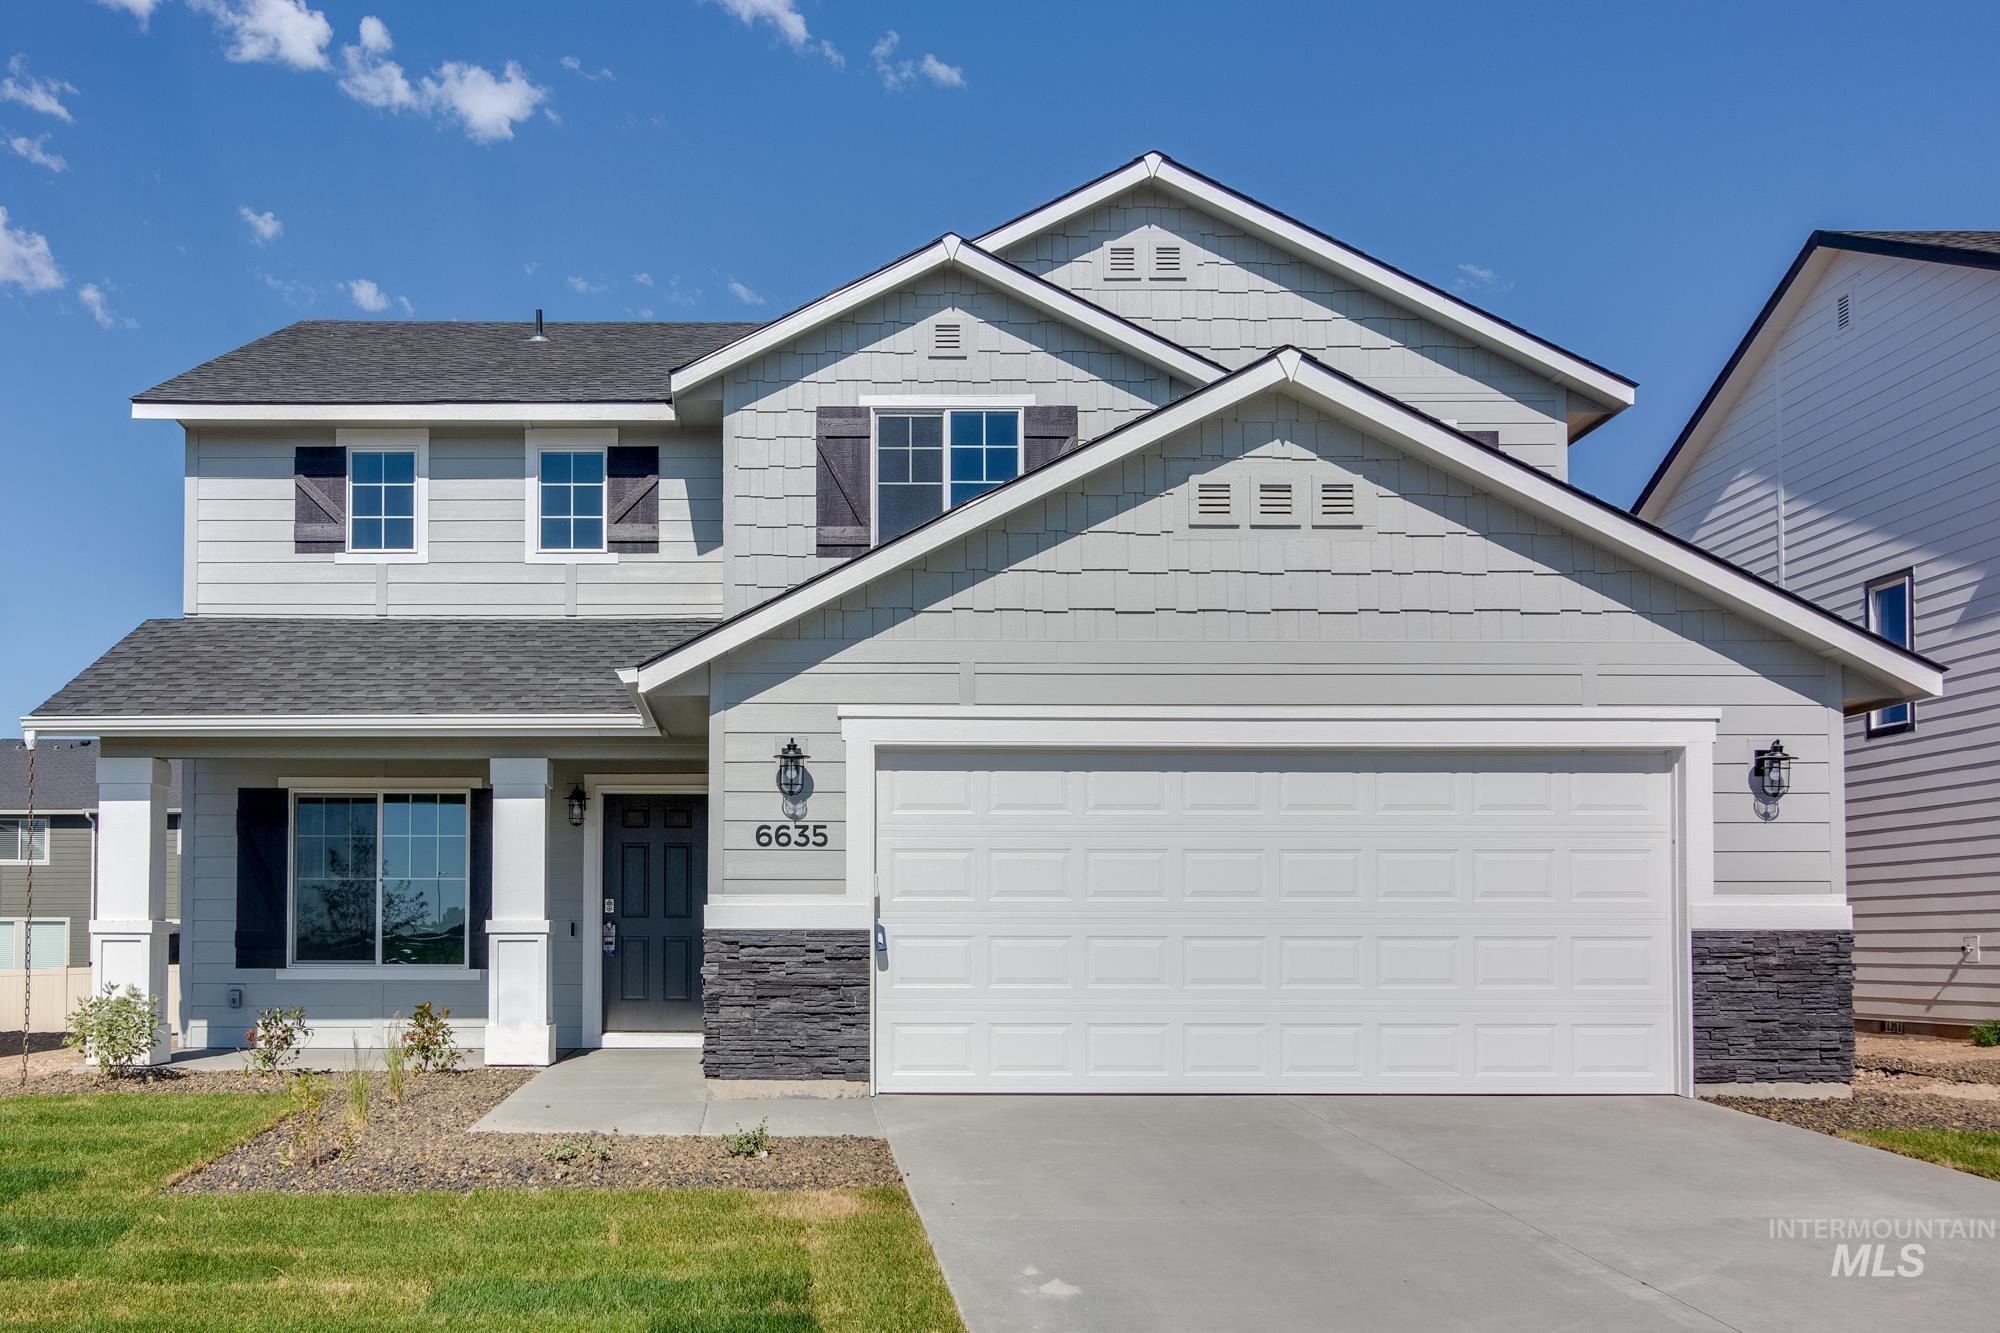 12752 Abbeygate Dr., Nampa, Idaho 83651, 4 Bedrooms, 2.5 Bathrooms, Residential For Sale, Price $416,990,MLS 98908546